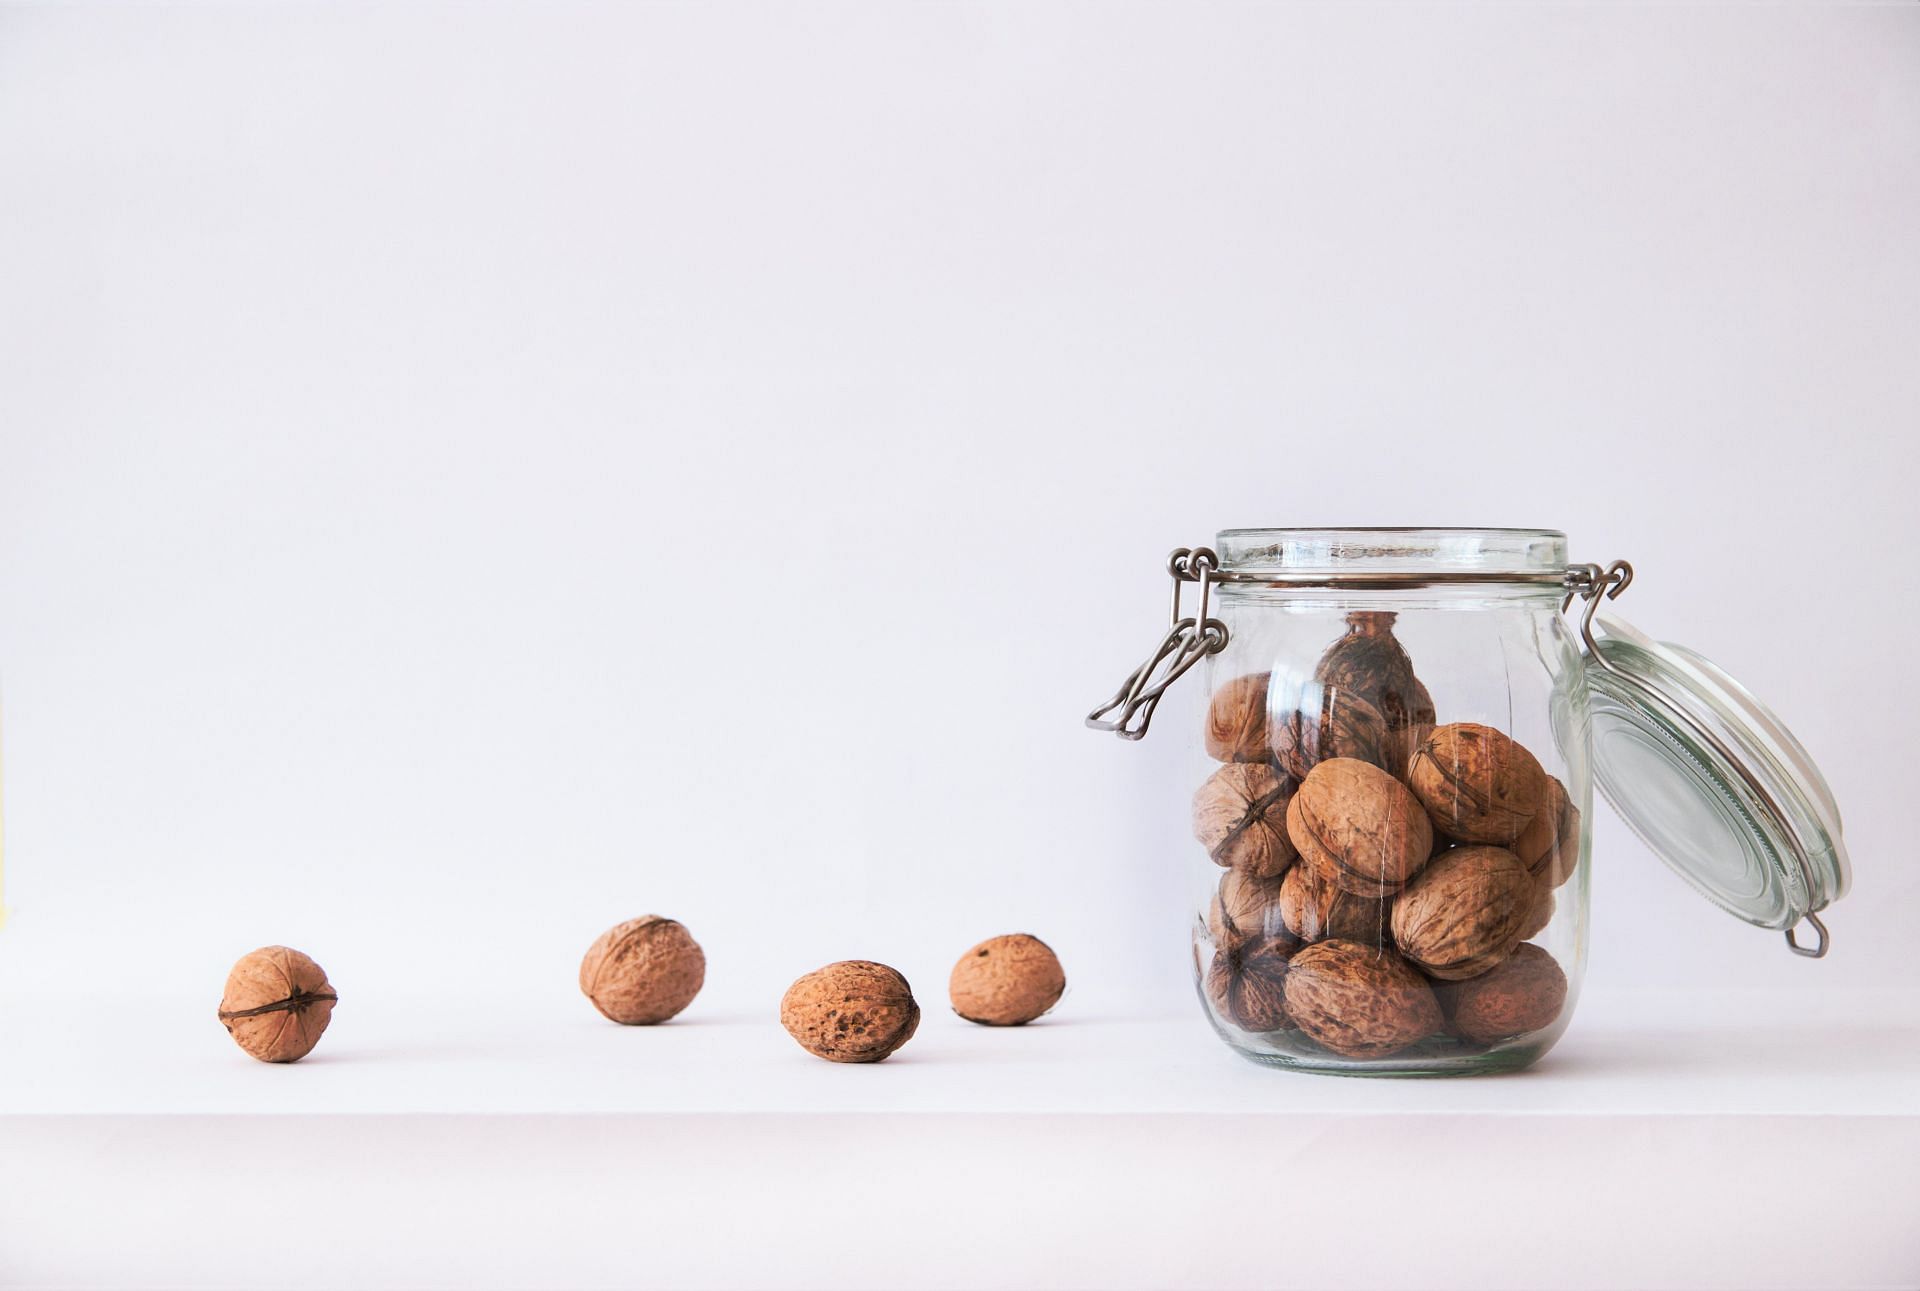 Walnuts packed with benefits in a jar (Image via Pexels)